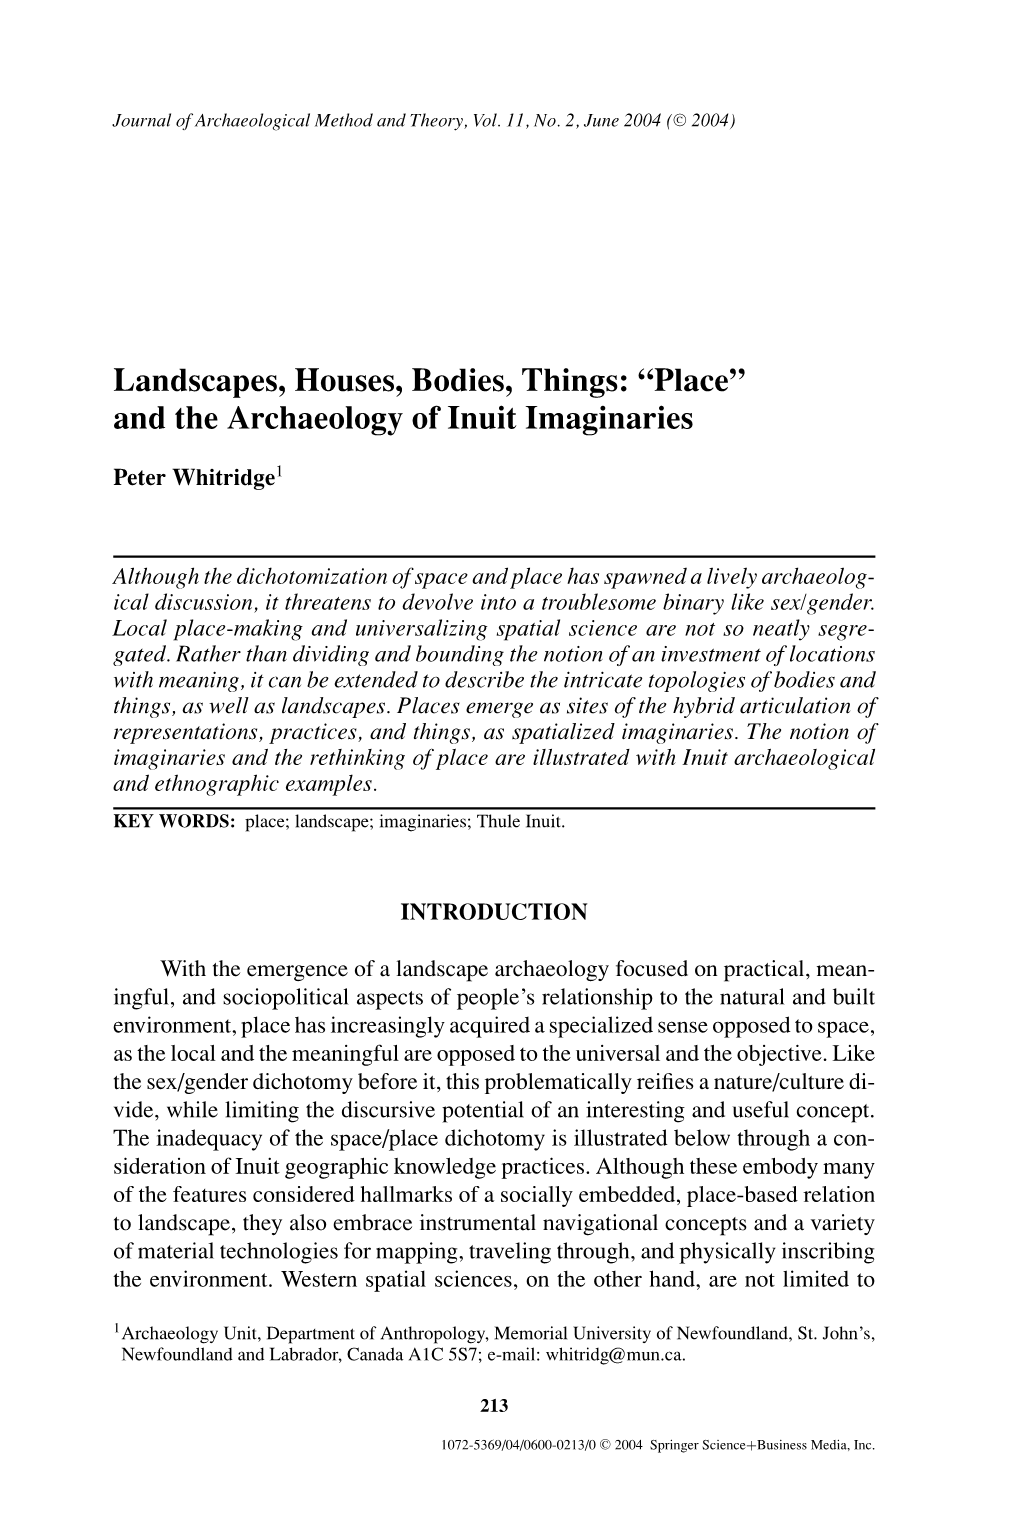 Landscapes, Houses, Bodies, Things: “Place” and the Archaeology of Inuit Imaginaries